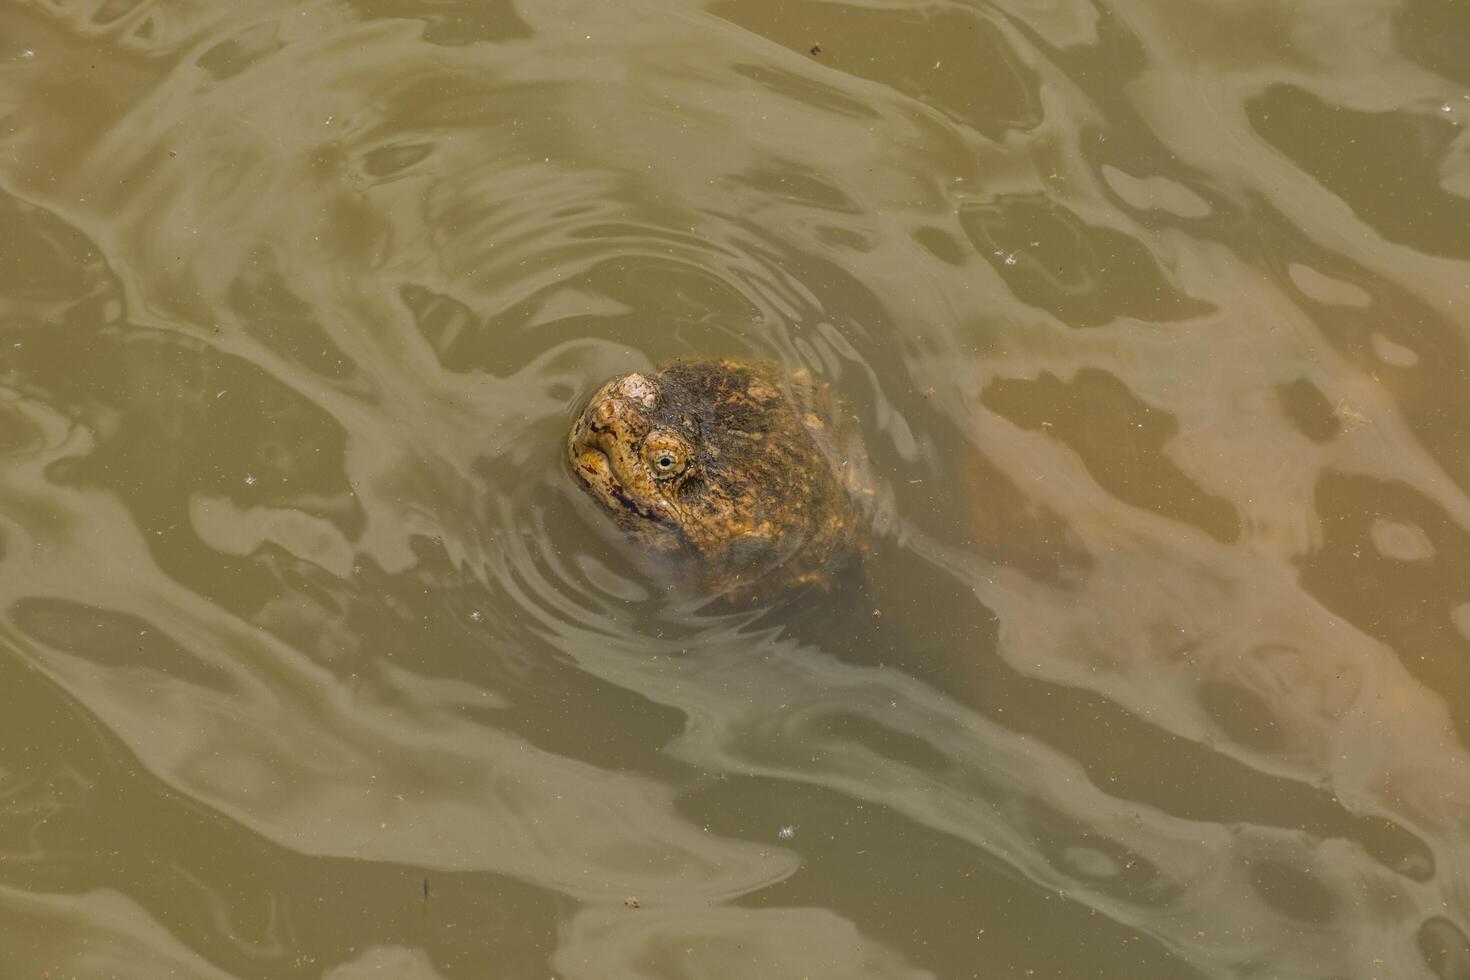 Snapping turtle in the water photo